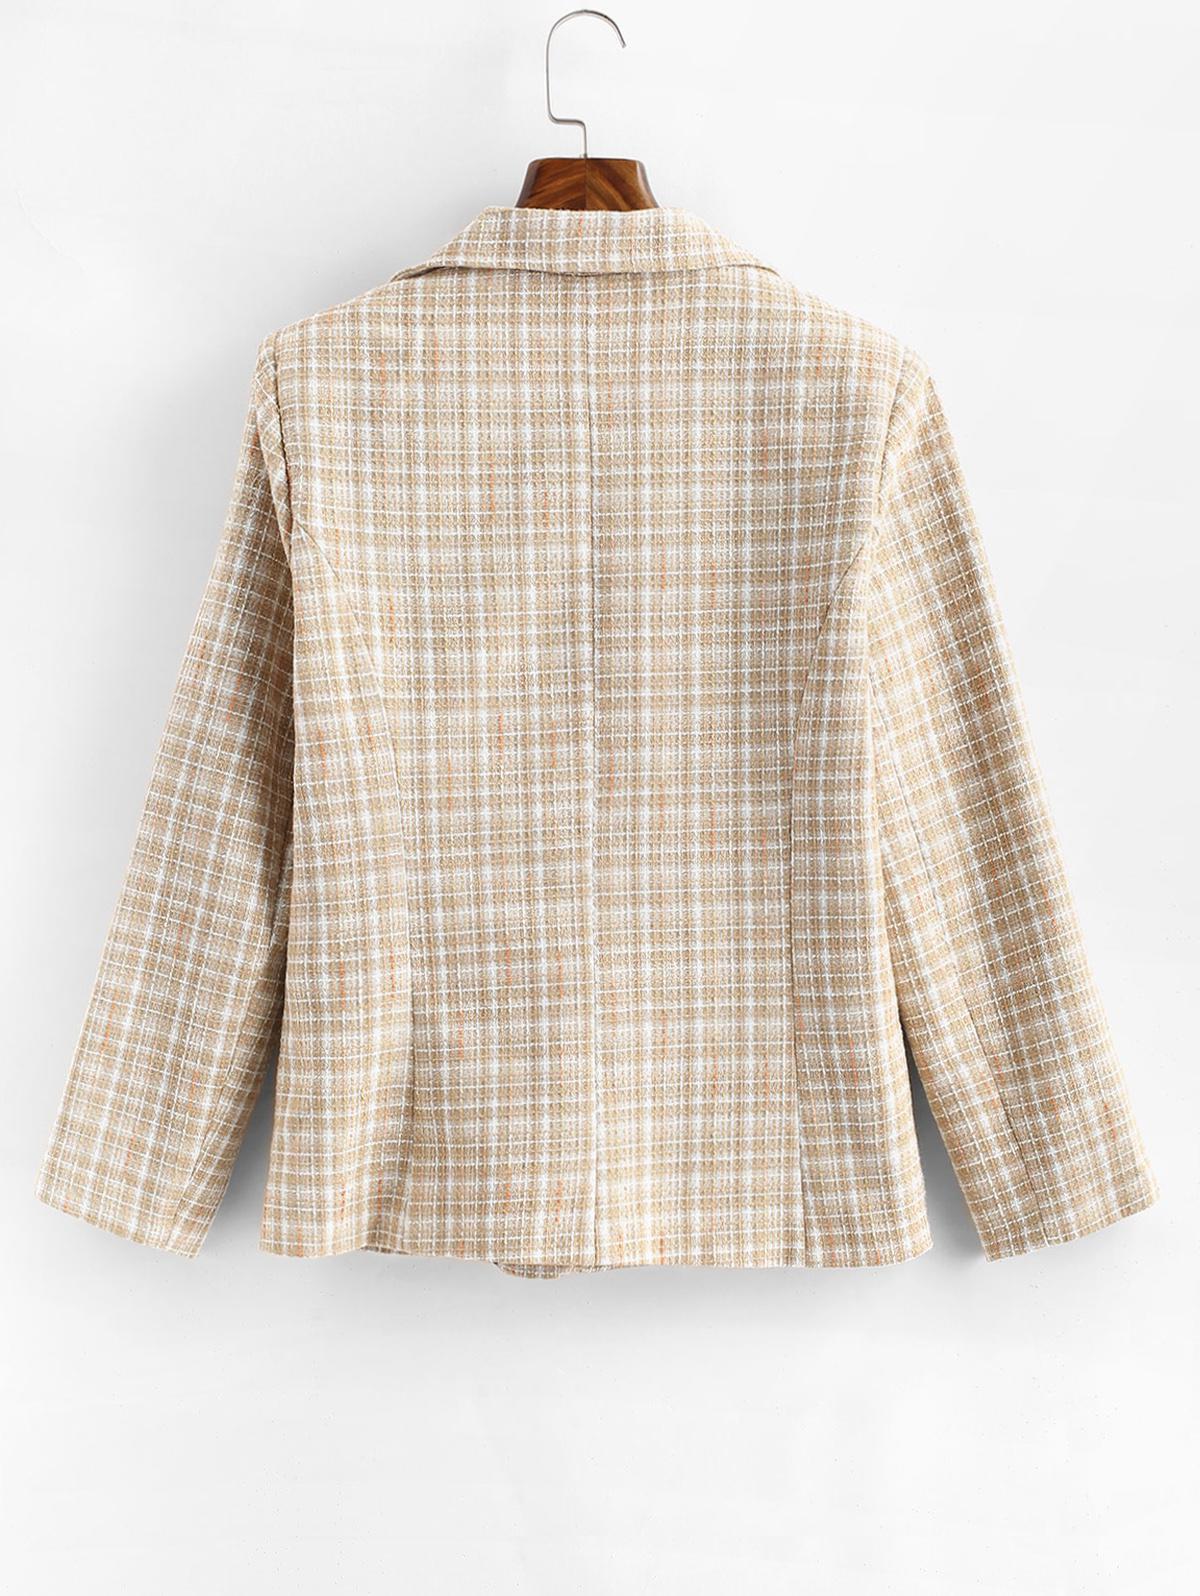 Zaful Blazers One Buttoned Pockets Plaid Tweed Blazer in Natural | Lyst